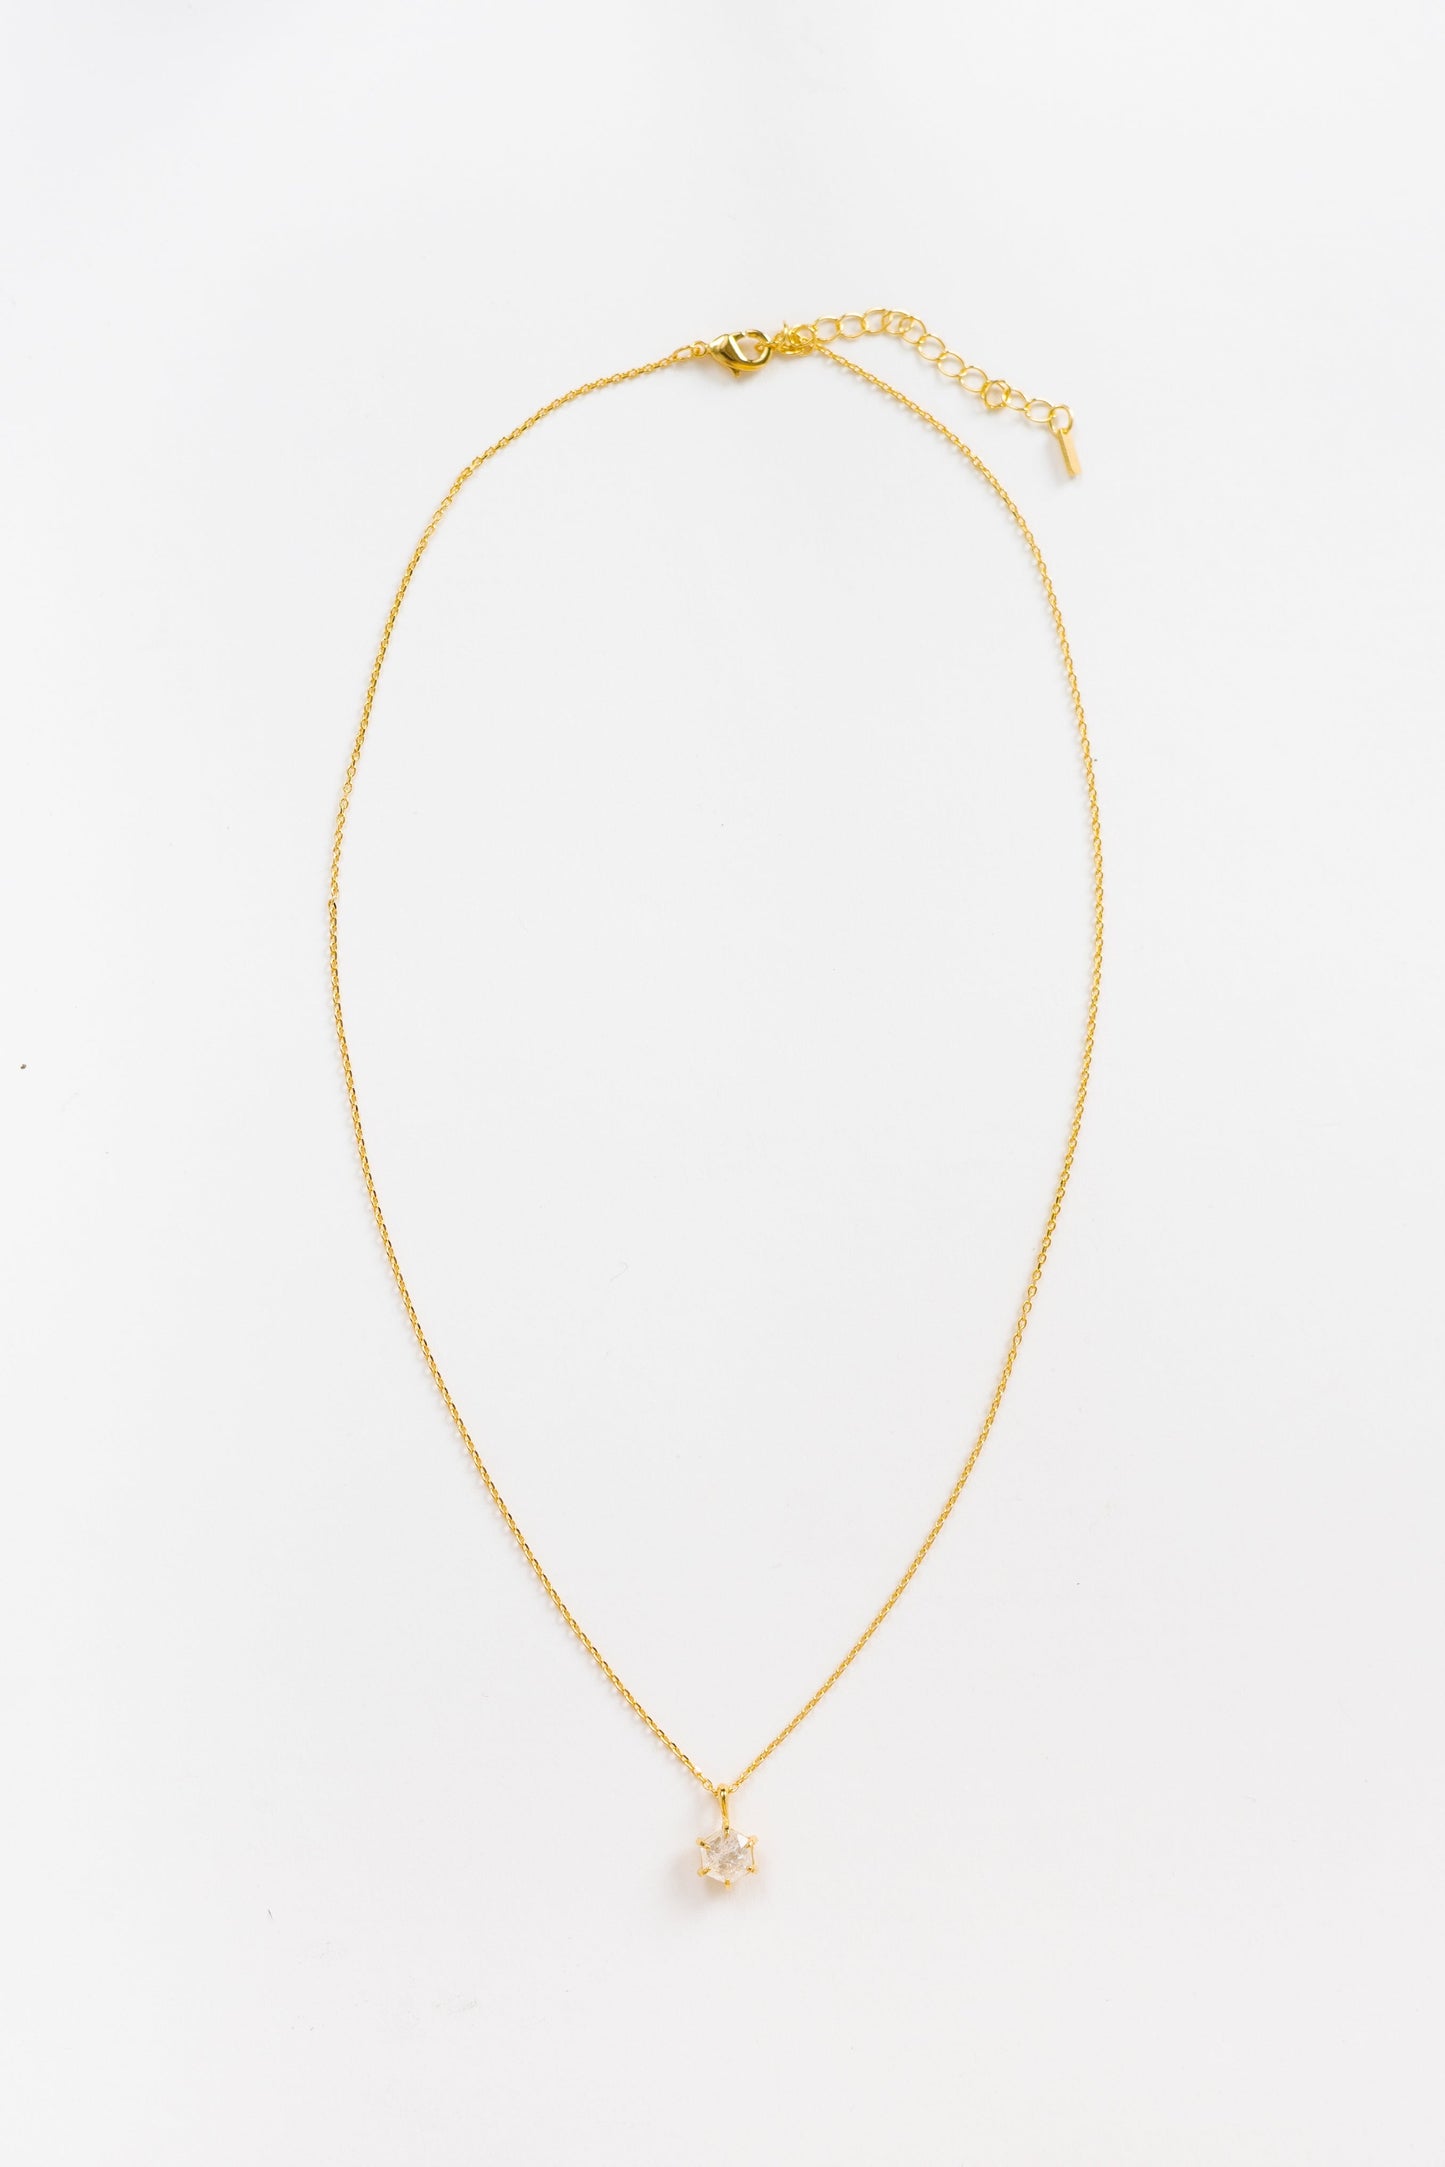 Cove Windsor Necklace WOMEN'S NECKLACE Cove Accessories 